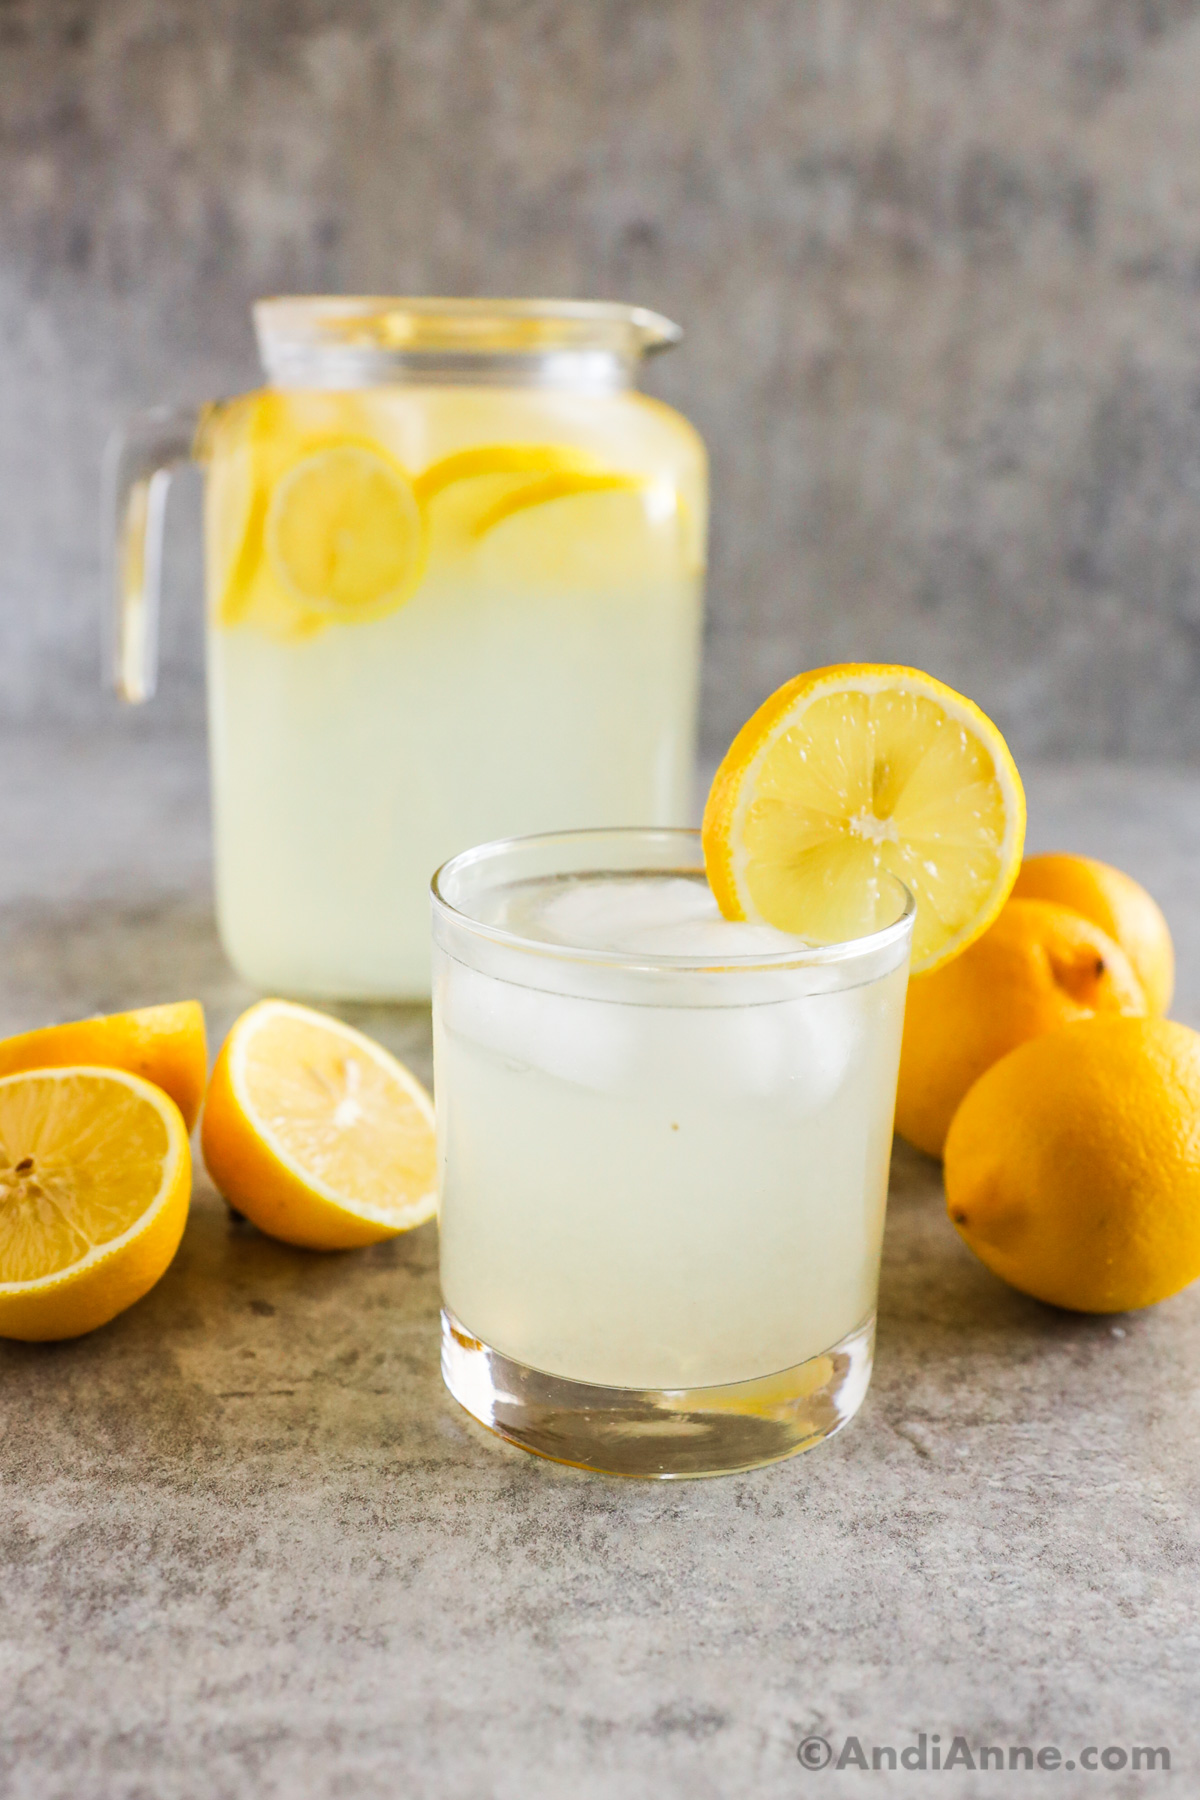 a full glass of lemonade with ice and a slice of lemon as garnish on edge of glass. Lemons and full pitcher of lemonade sit in the background